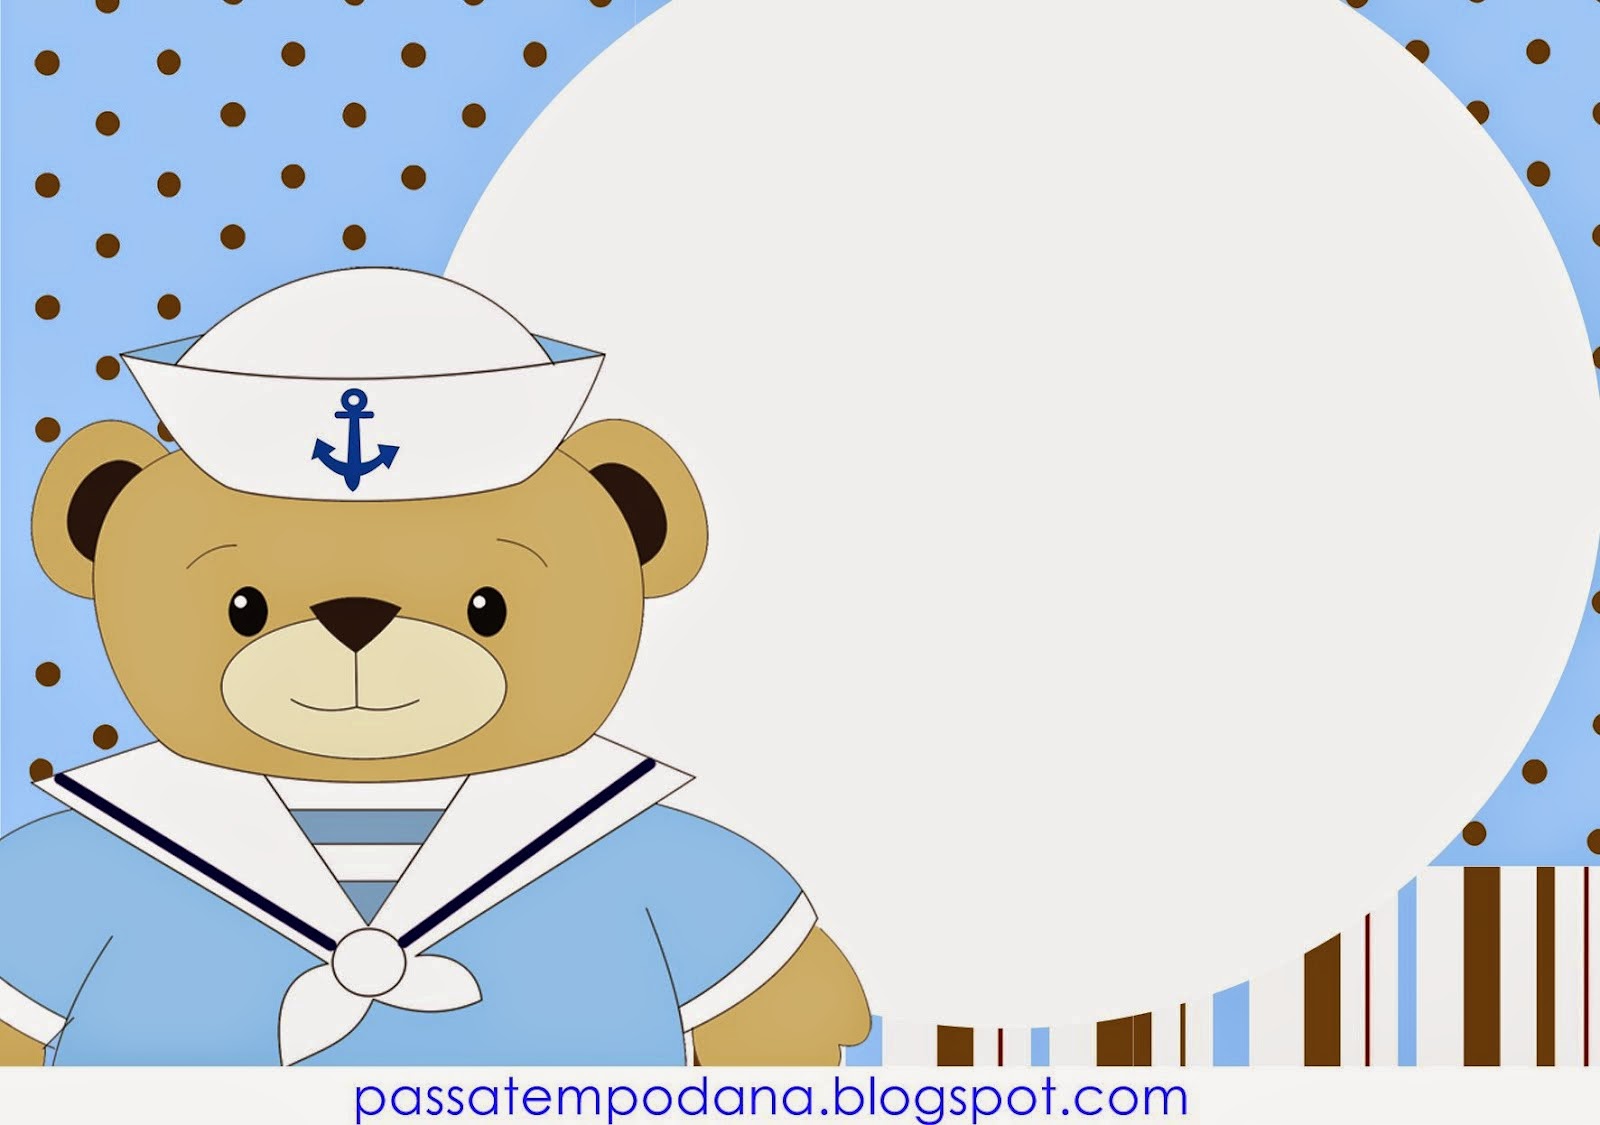 Cute Sailor Bear Free Printable Invitations, Labels or Cards.